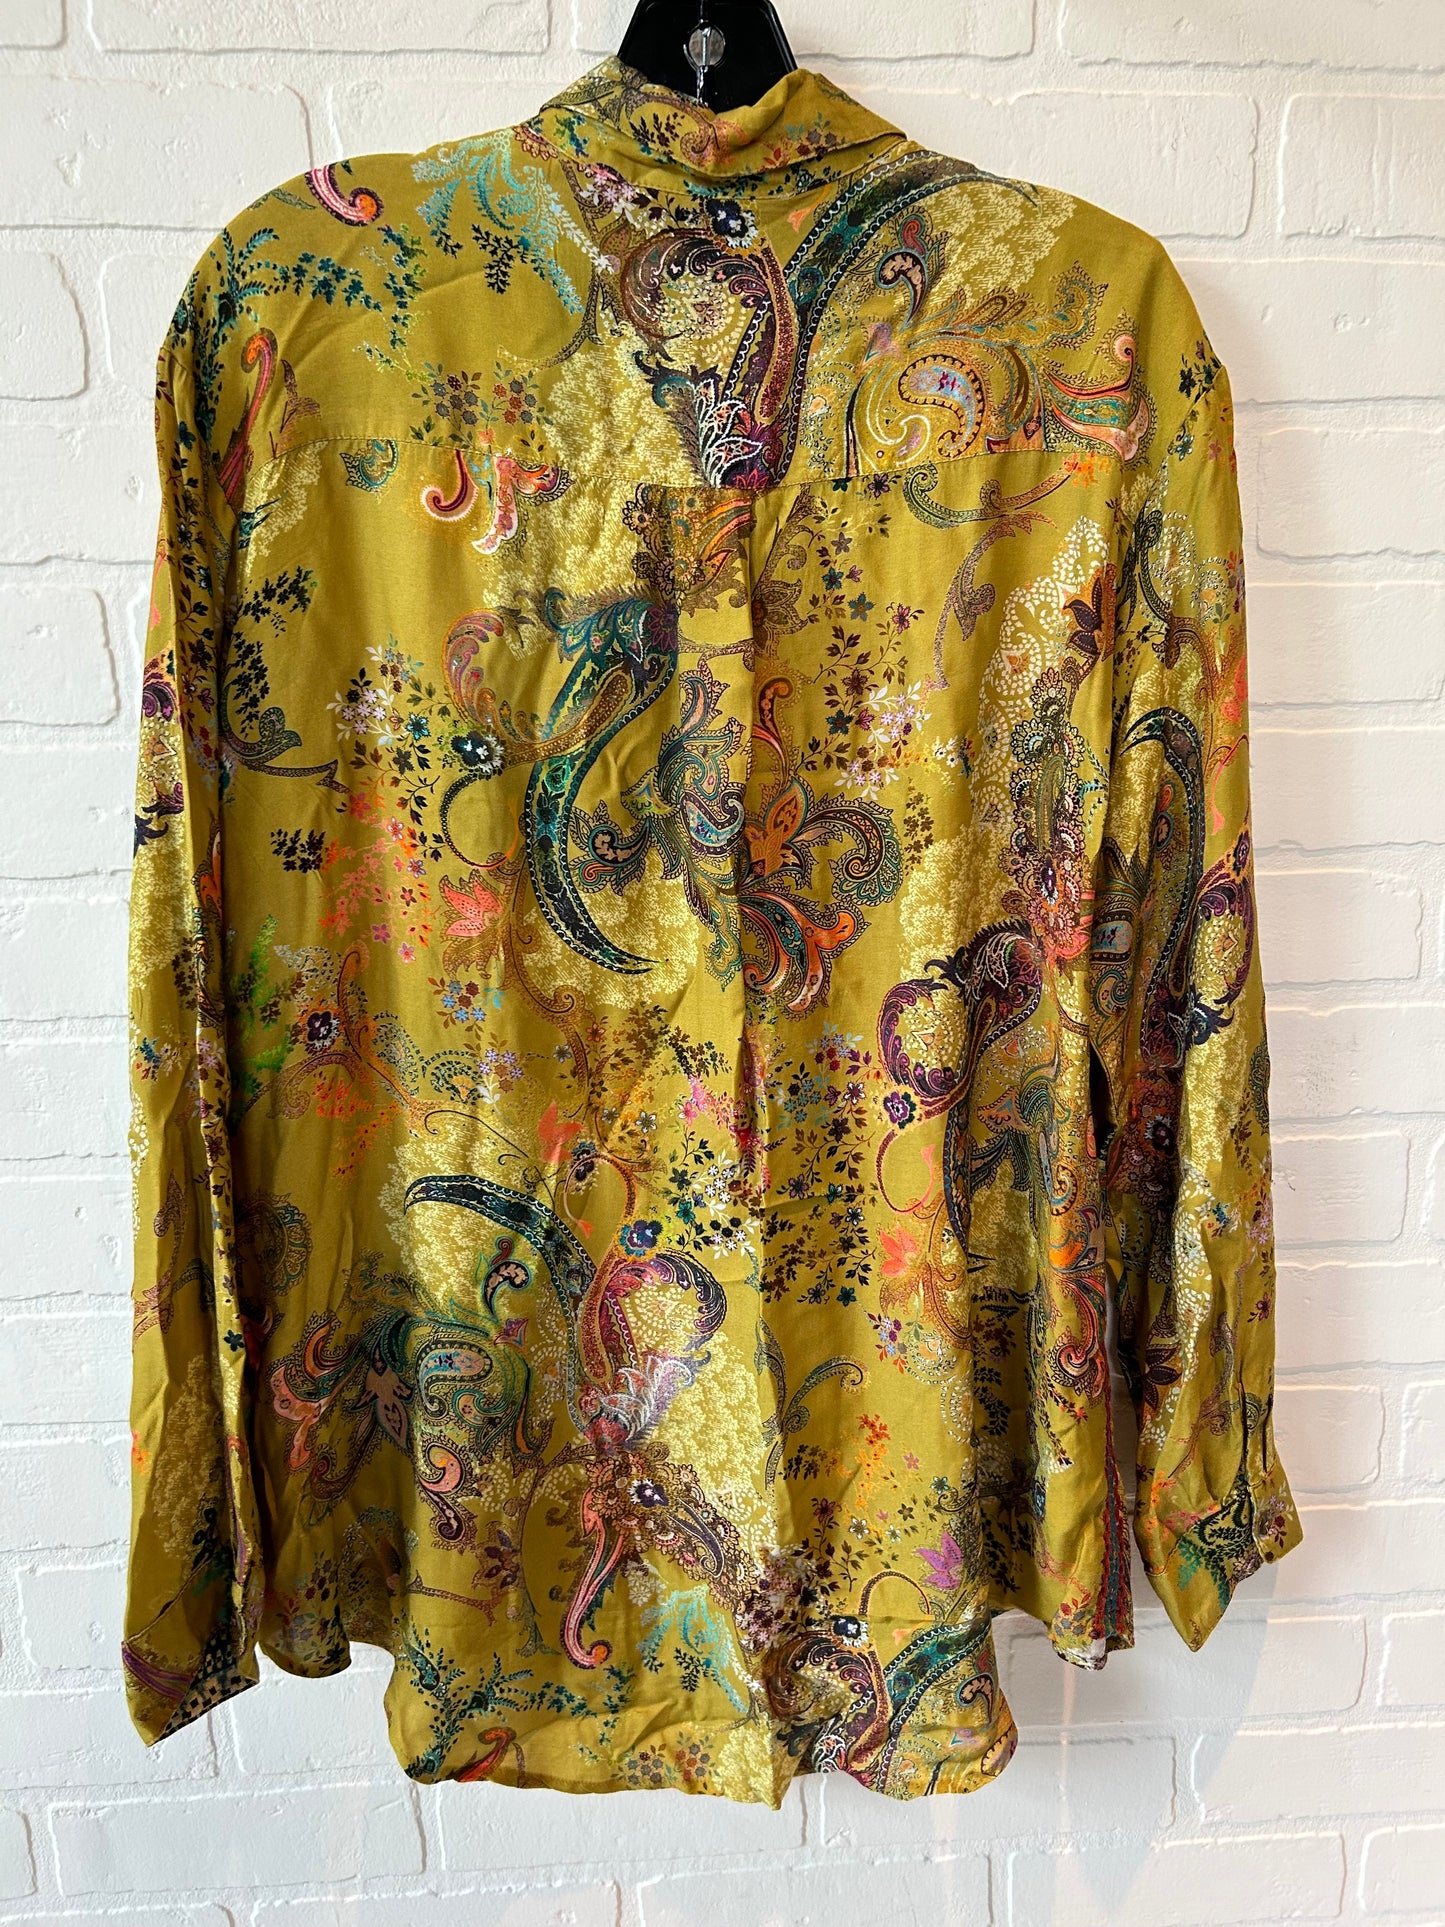 Yellow Top Long Sleeve Designer Johnny Was, Size S